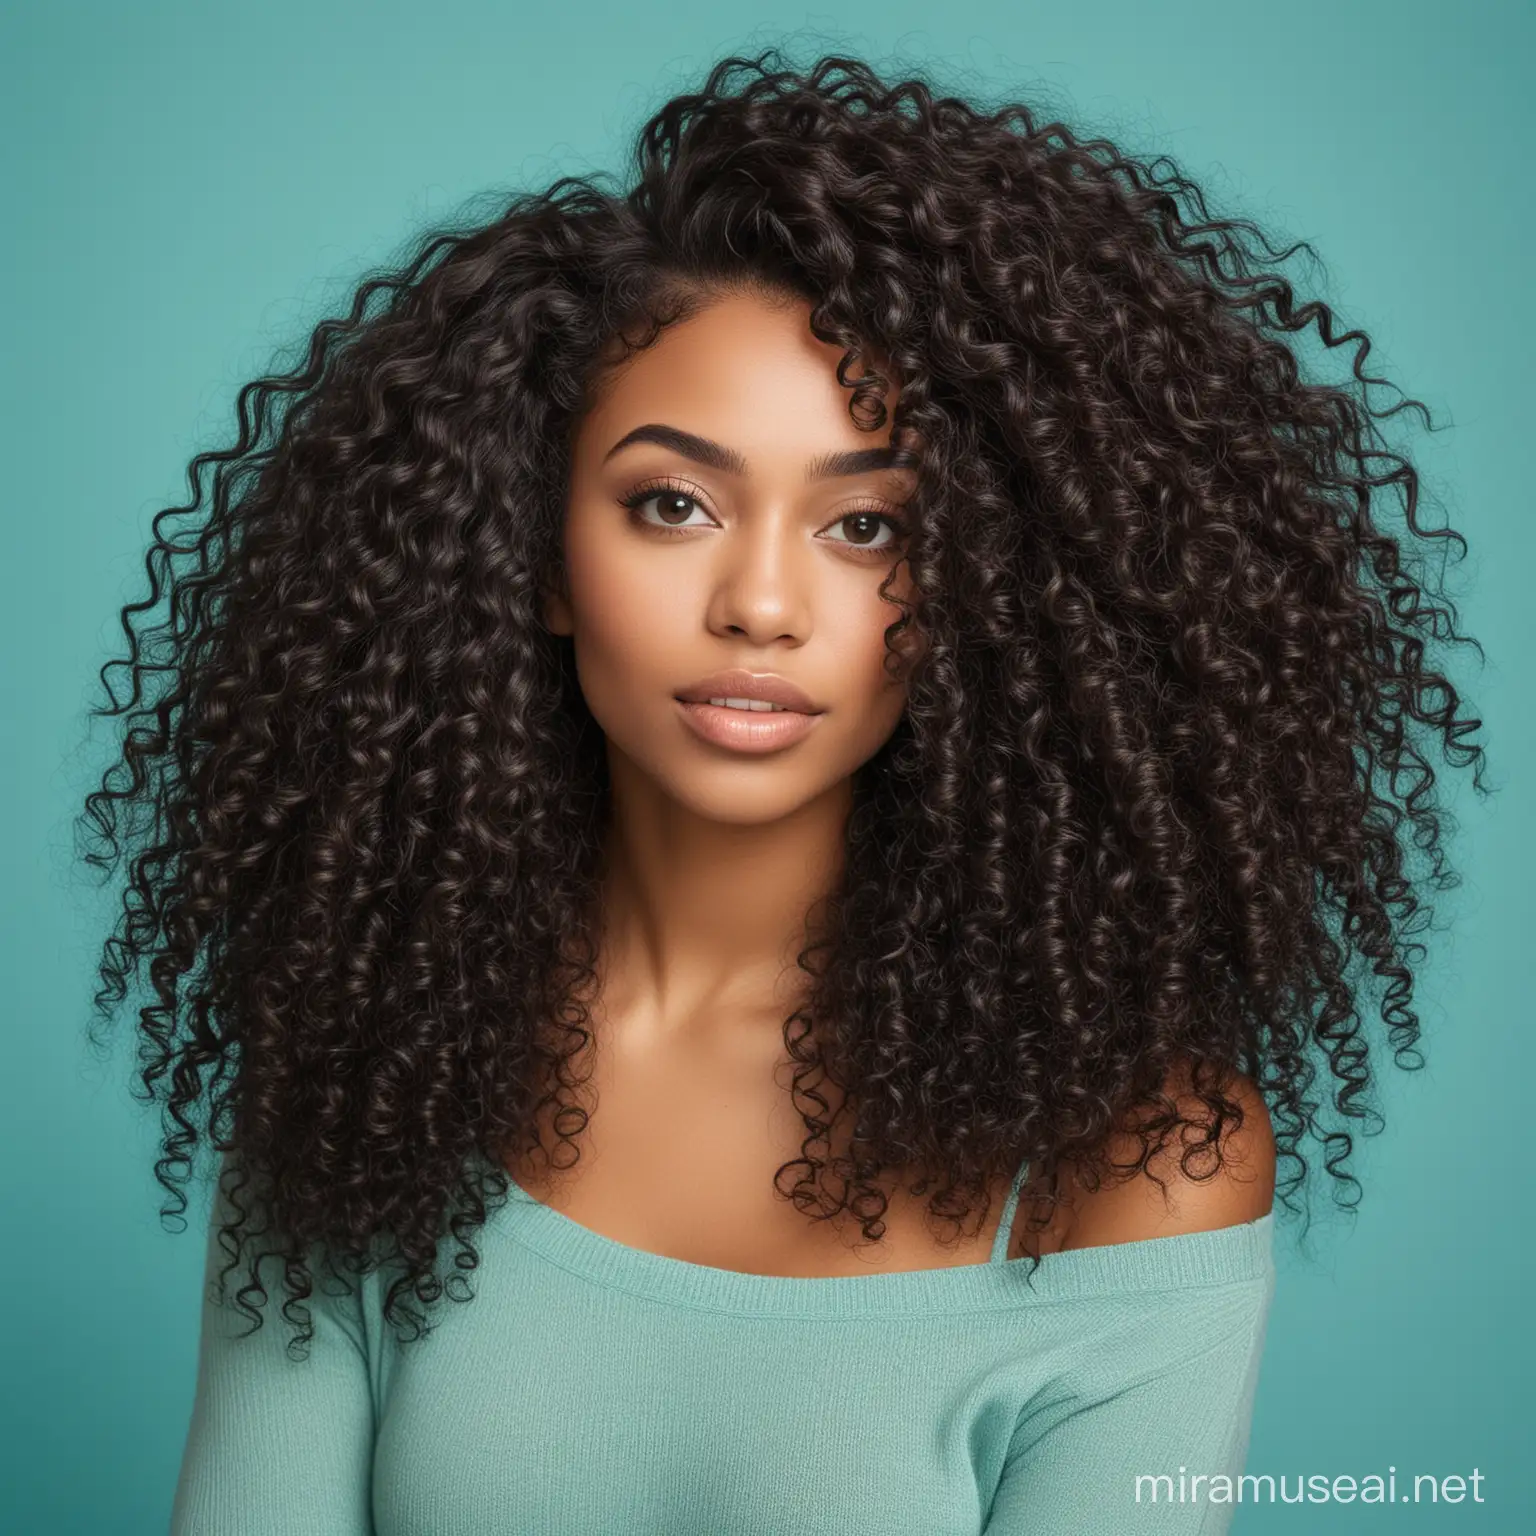 Elegant Black Woman with Curly Long Hair on Teal Background